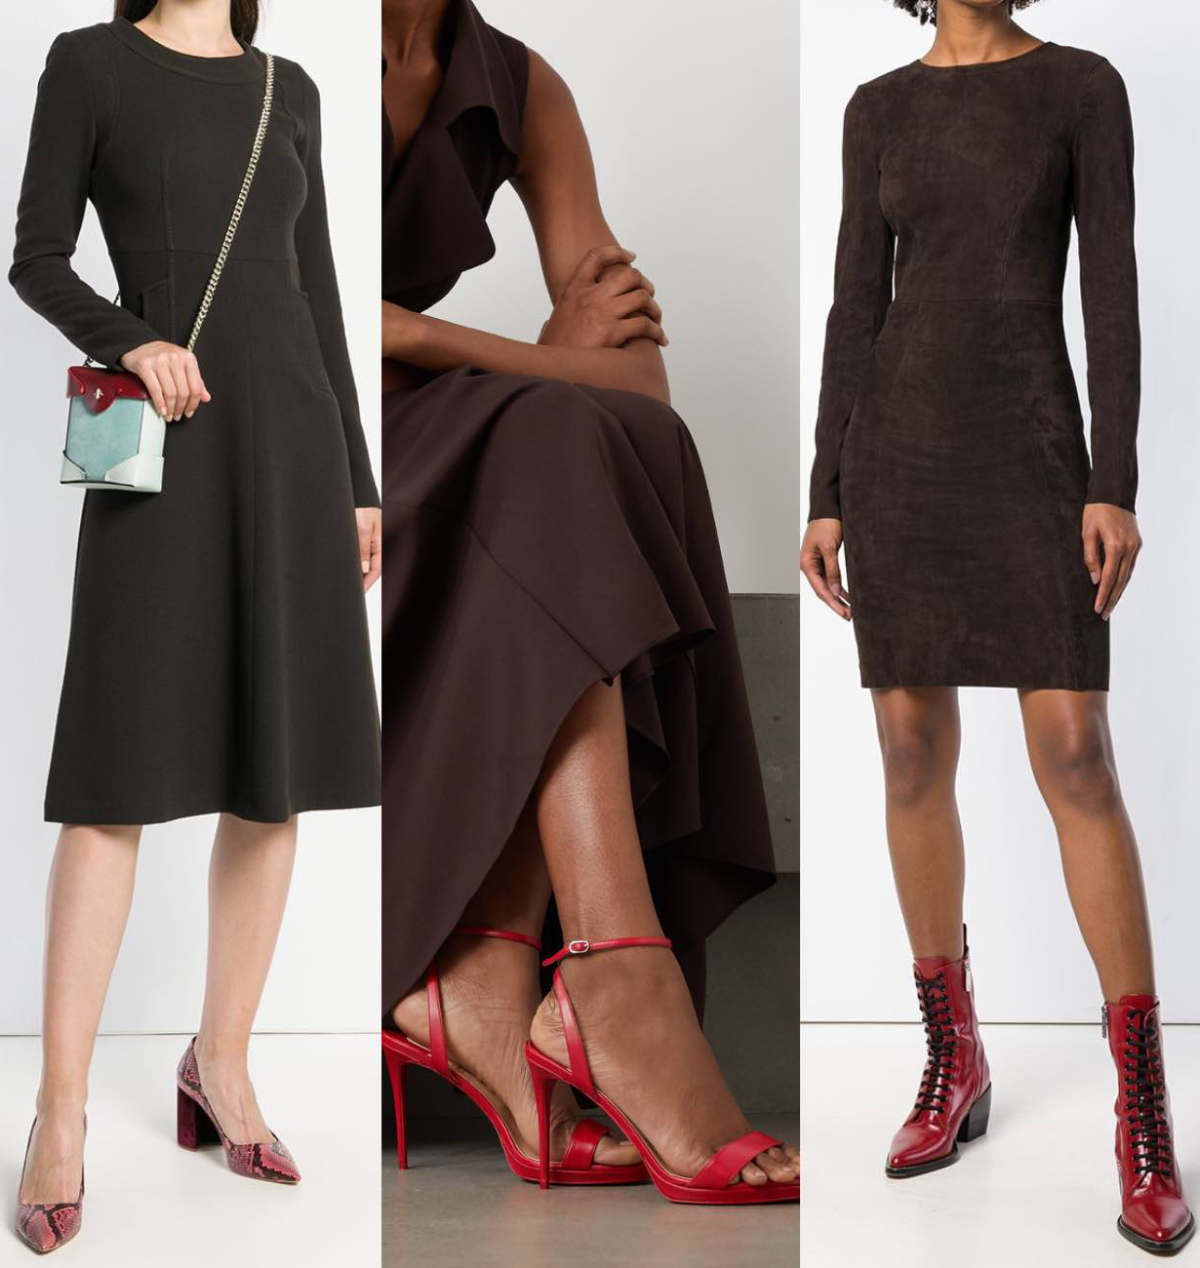 What Color Shoes To Wear With A Brown Dress